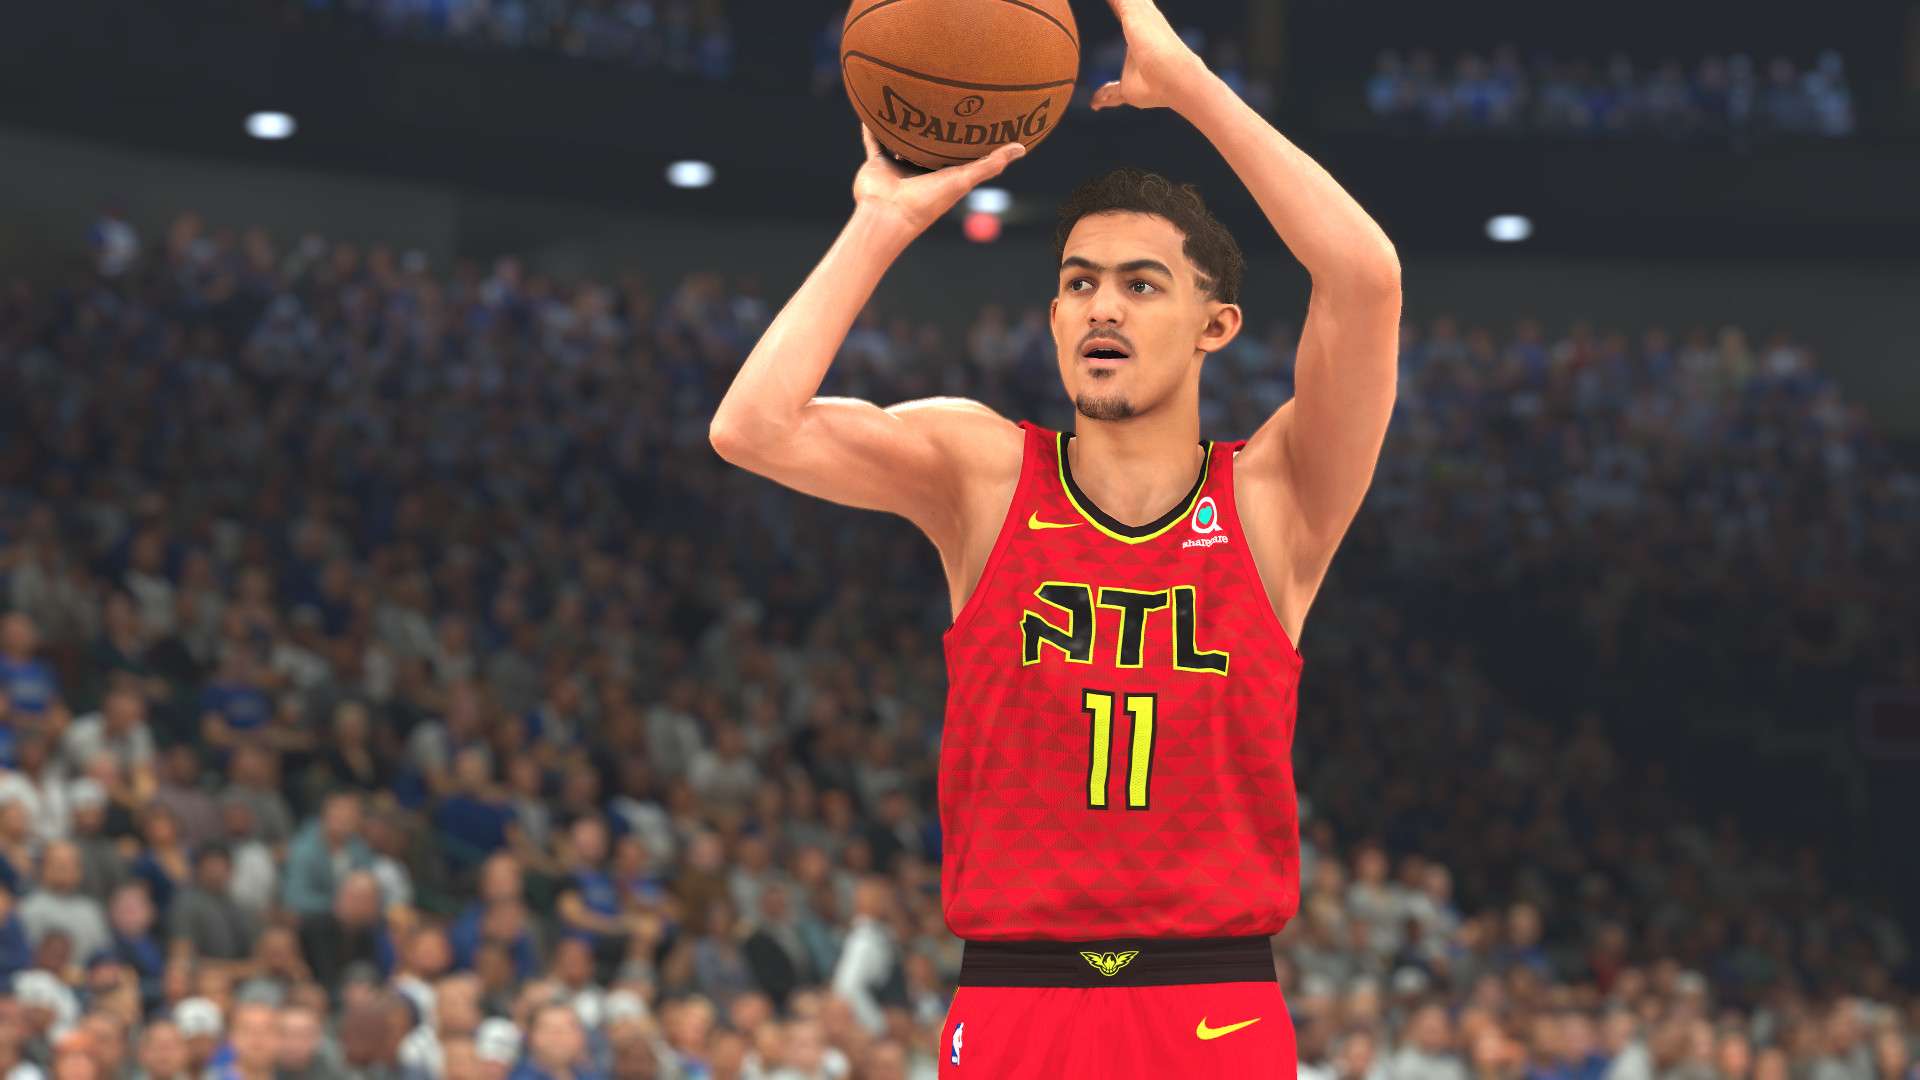 Nba 2k20 Review The Good The Bad And The New From 2k Sports Sporting News